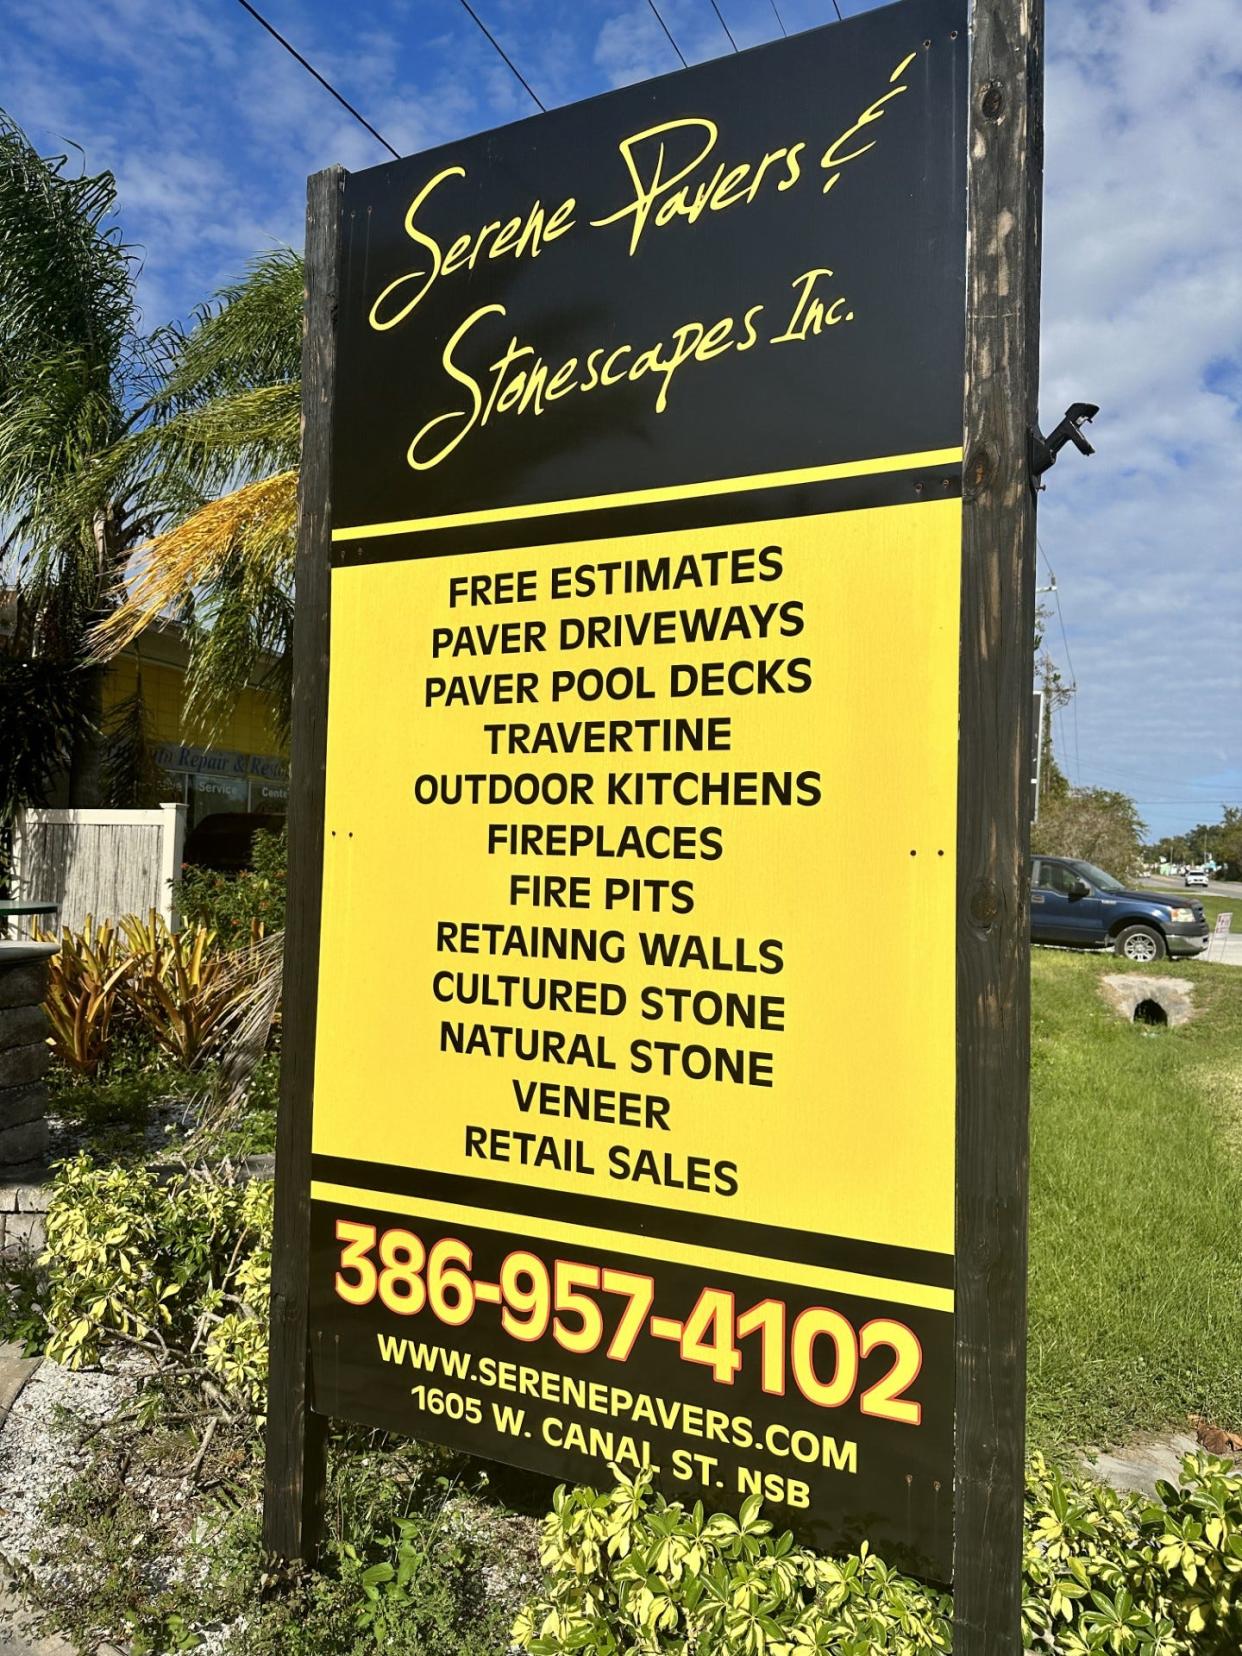 Serene Pavers & Stonescapes of New Smyrna Beach, which closed its doors on Oct. 17 without completing numerous jobs for which it was paid 50% deposits, has filed for bankruptcy, court documents show.